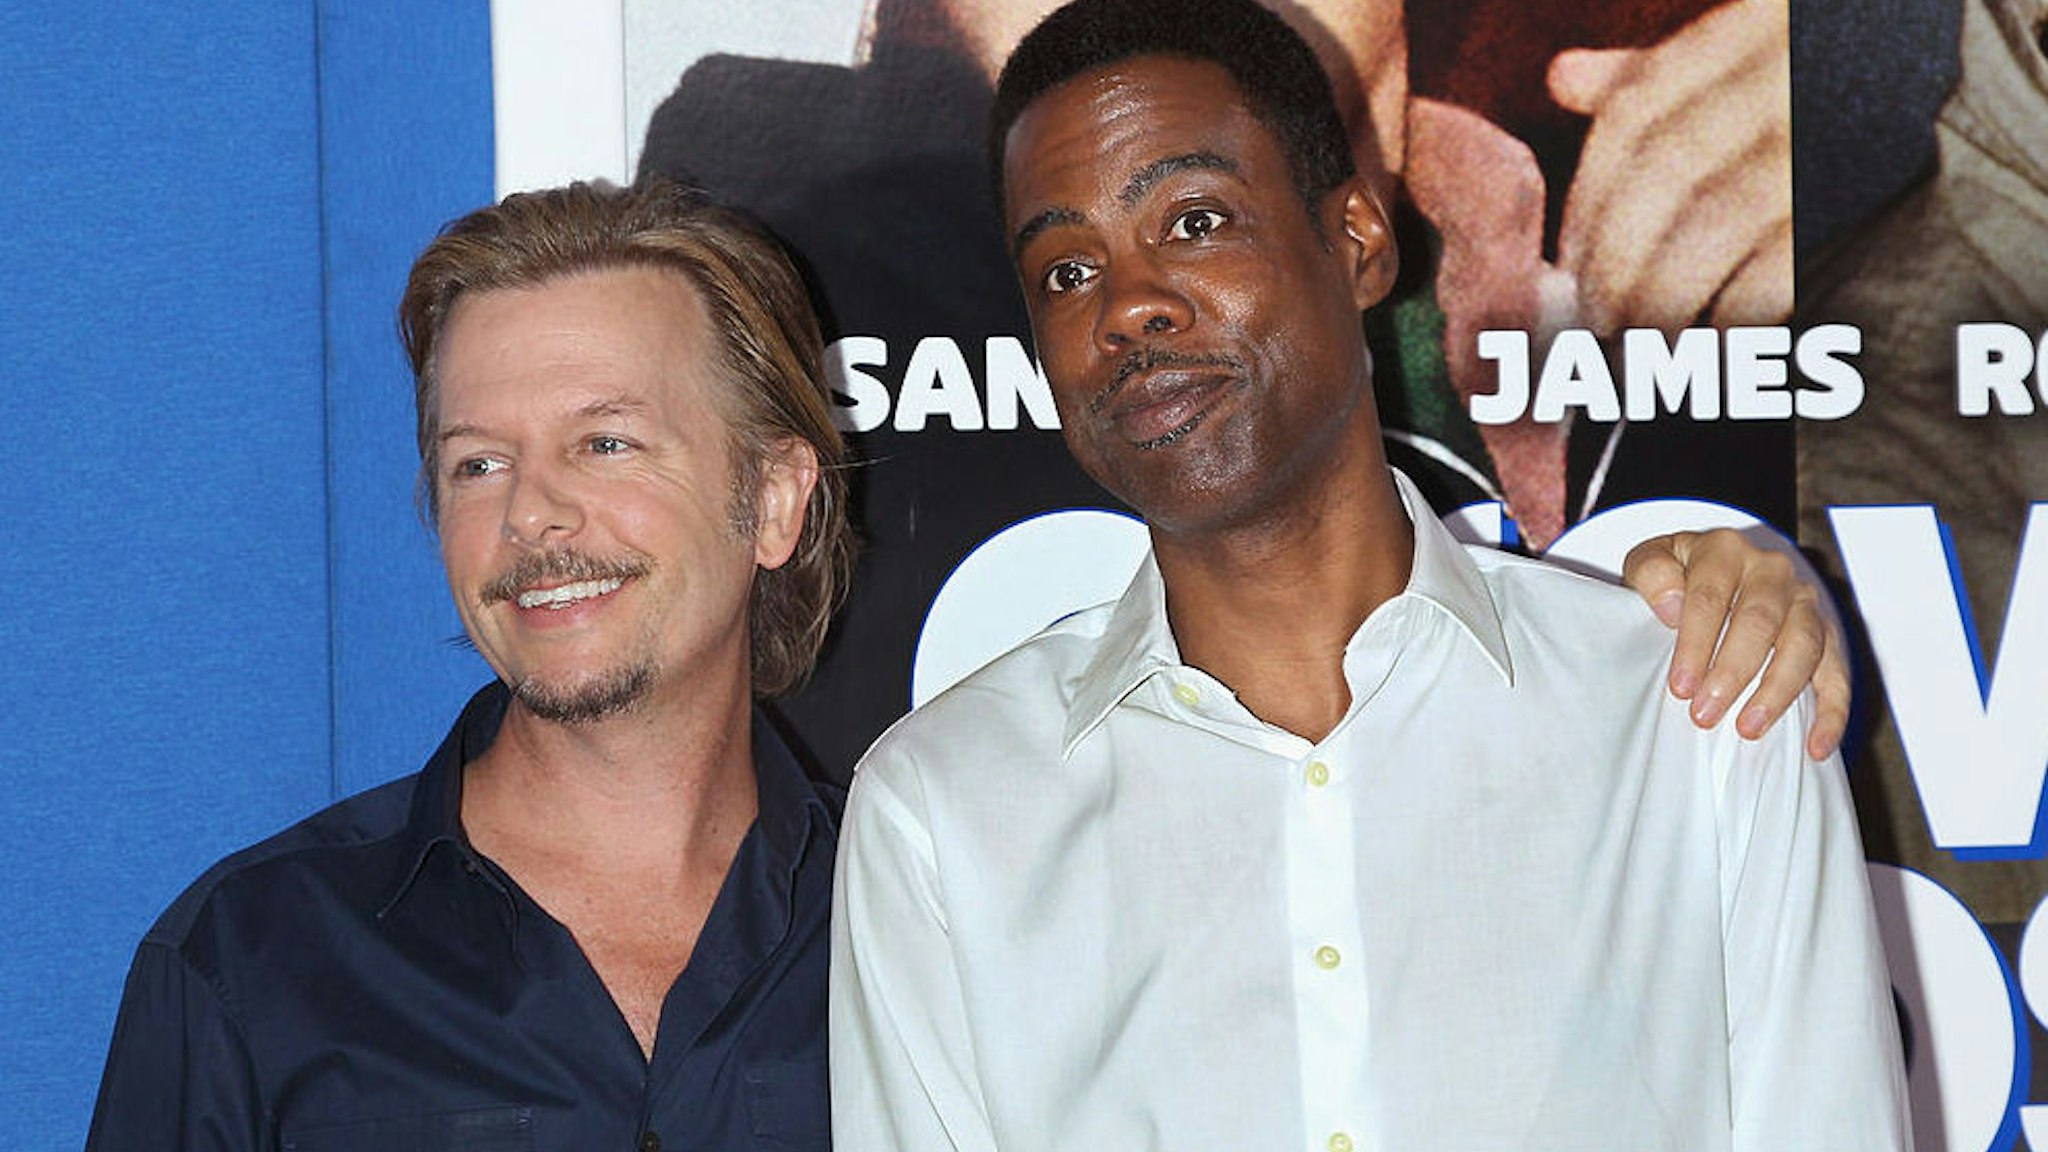 Actors David Spade and Chris Rock attend the "Grown Ups 2" New York Premiere at AMC Lincoln Square Theater on July 10, 2013 in New York City.